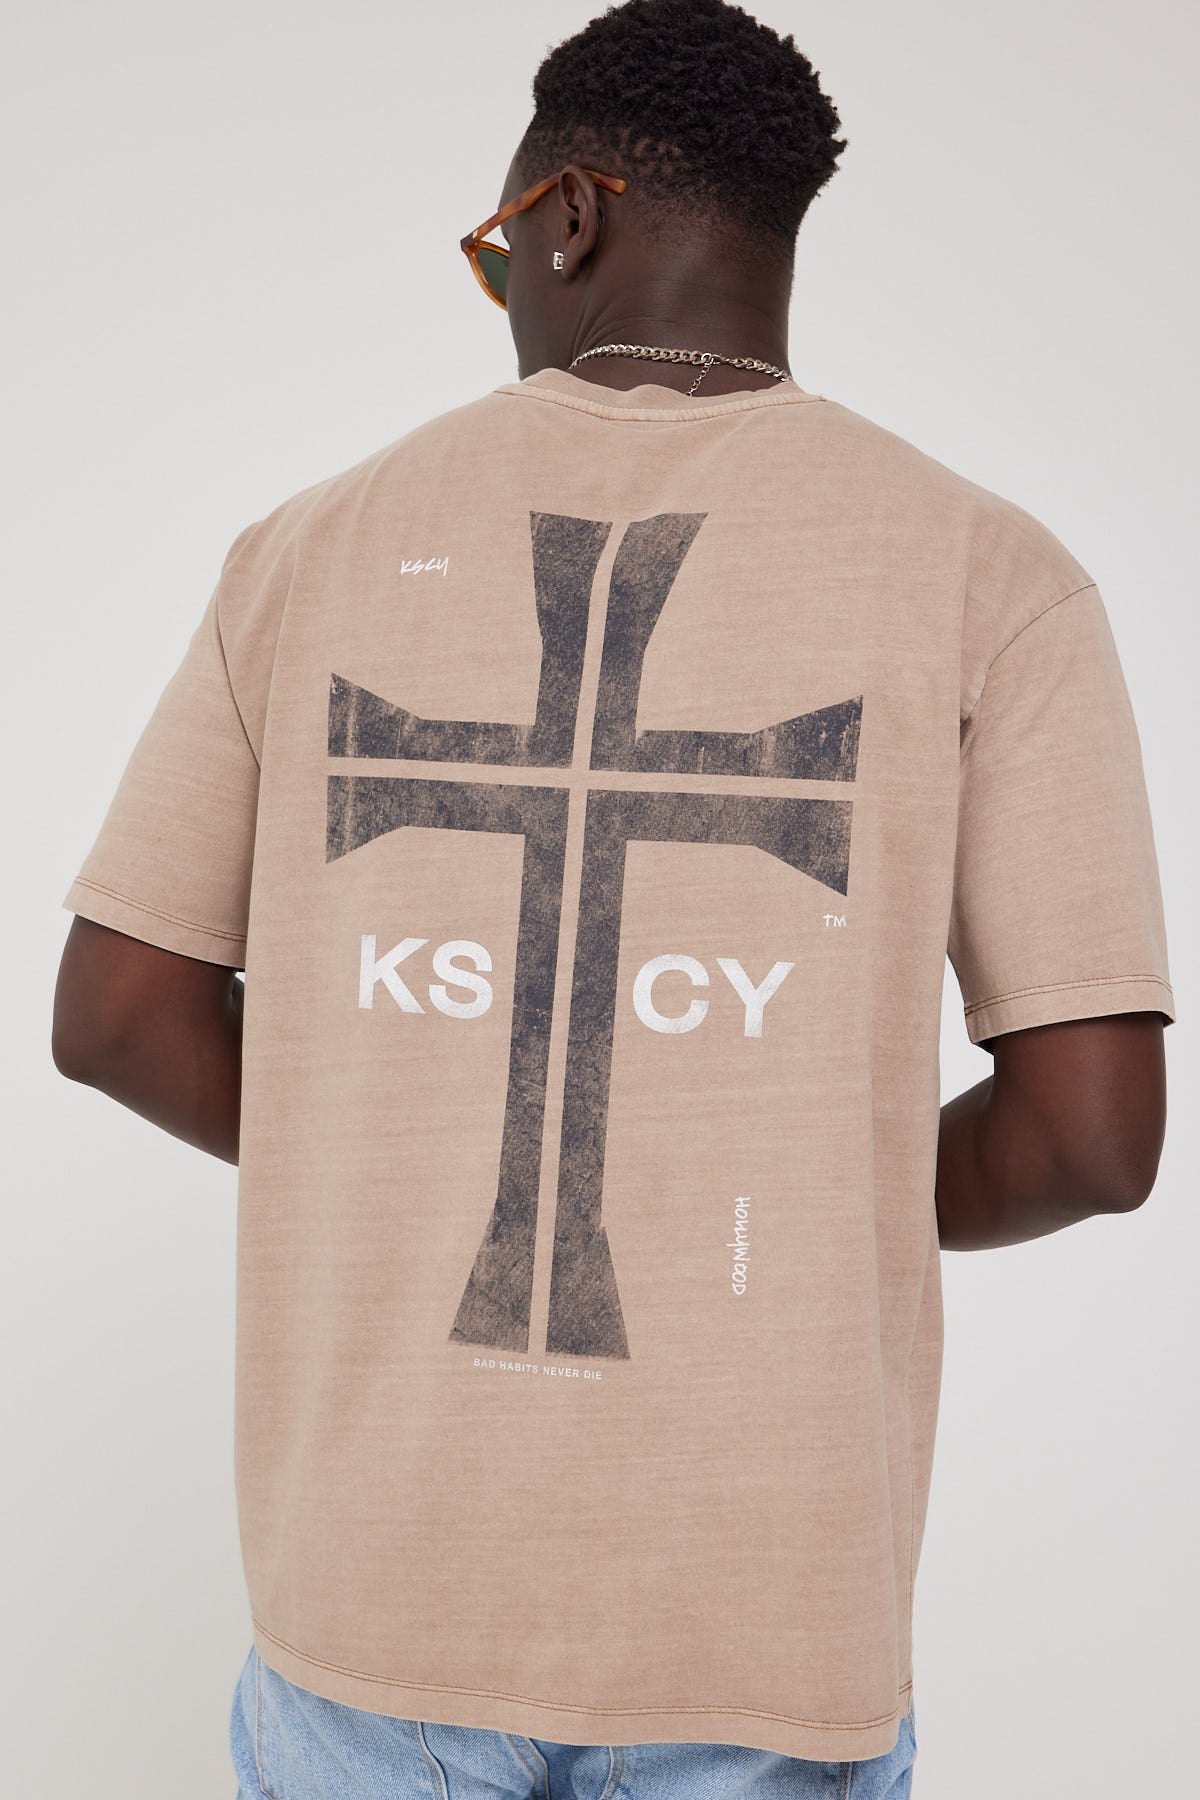 Kiss Chacey Ricochet Box Fit Tee Pigment Warm Taupe